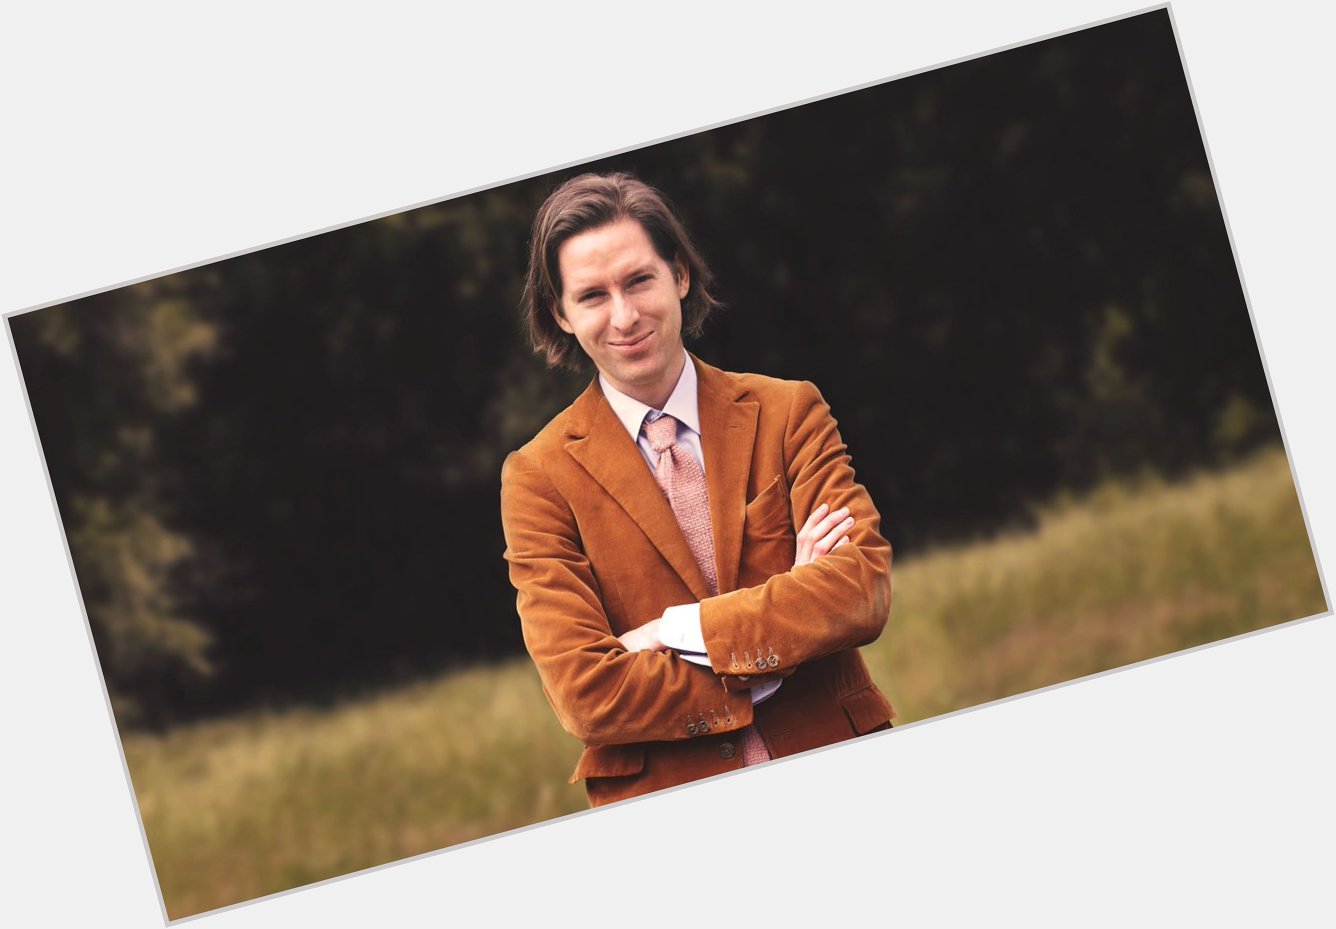 Happy birthday to my all time fav director
Fantastic Mr, Wes Anderson 